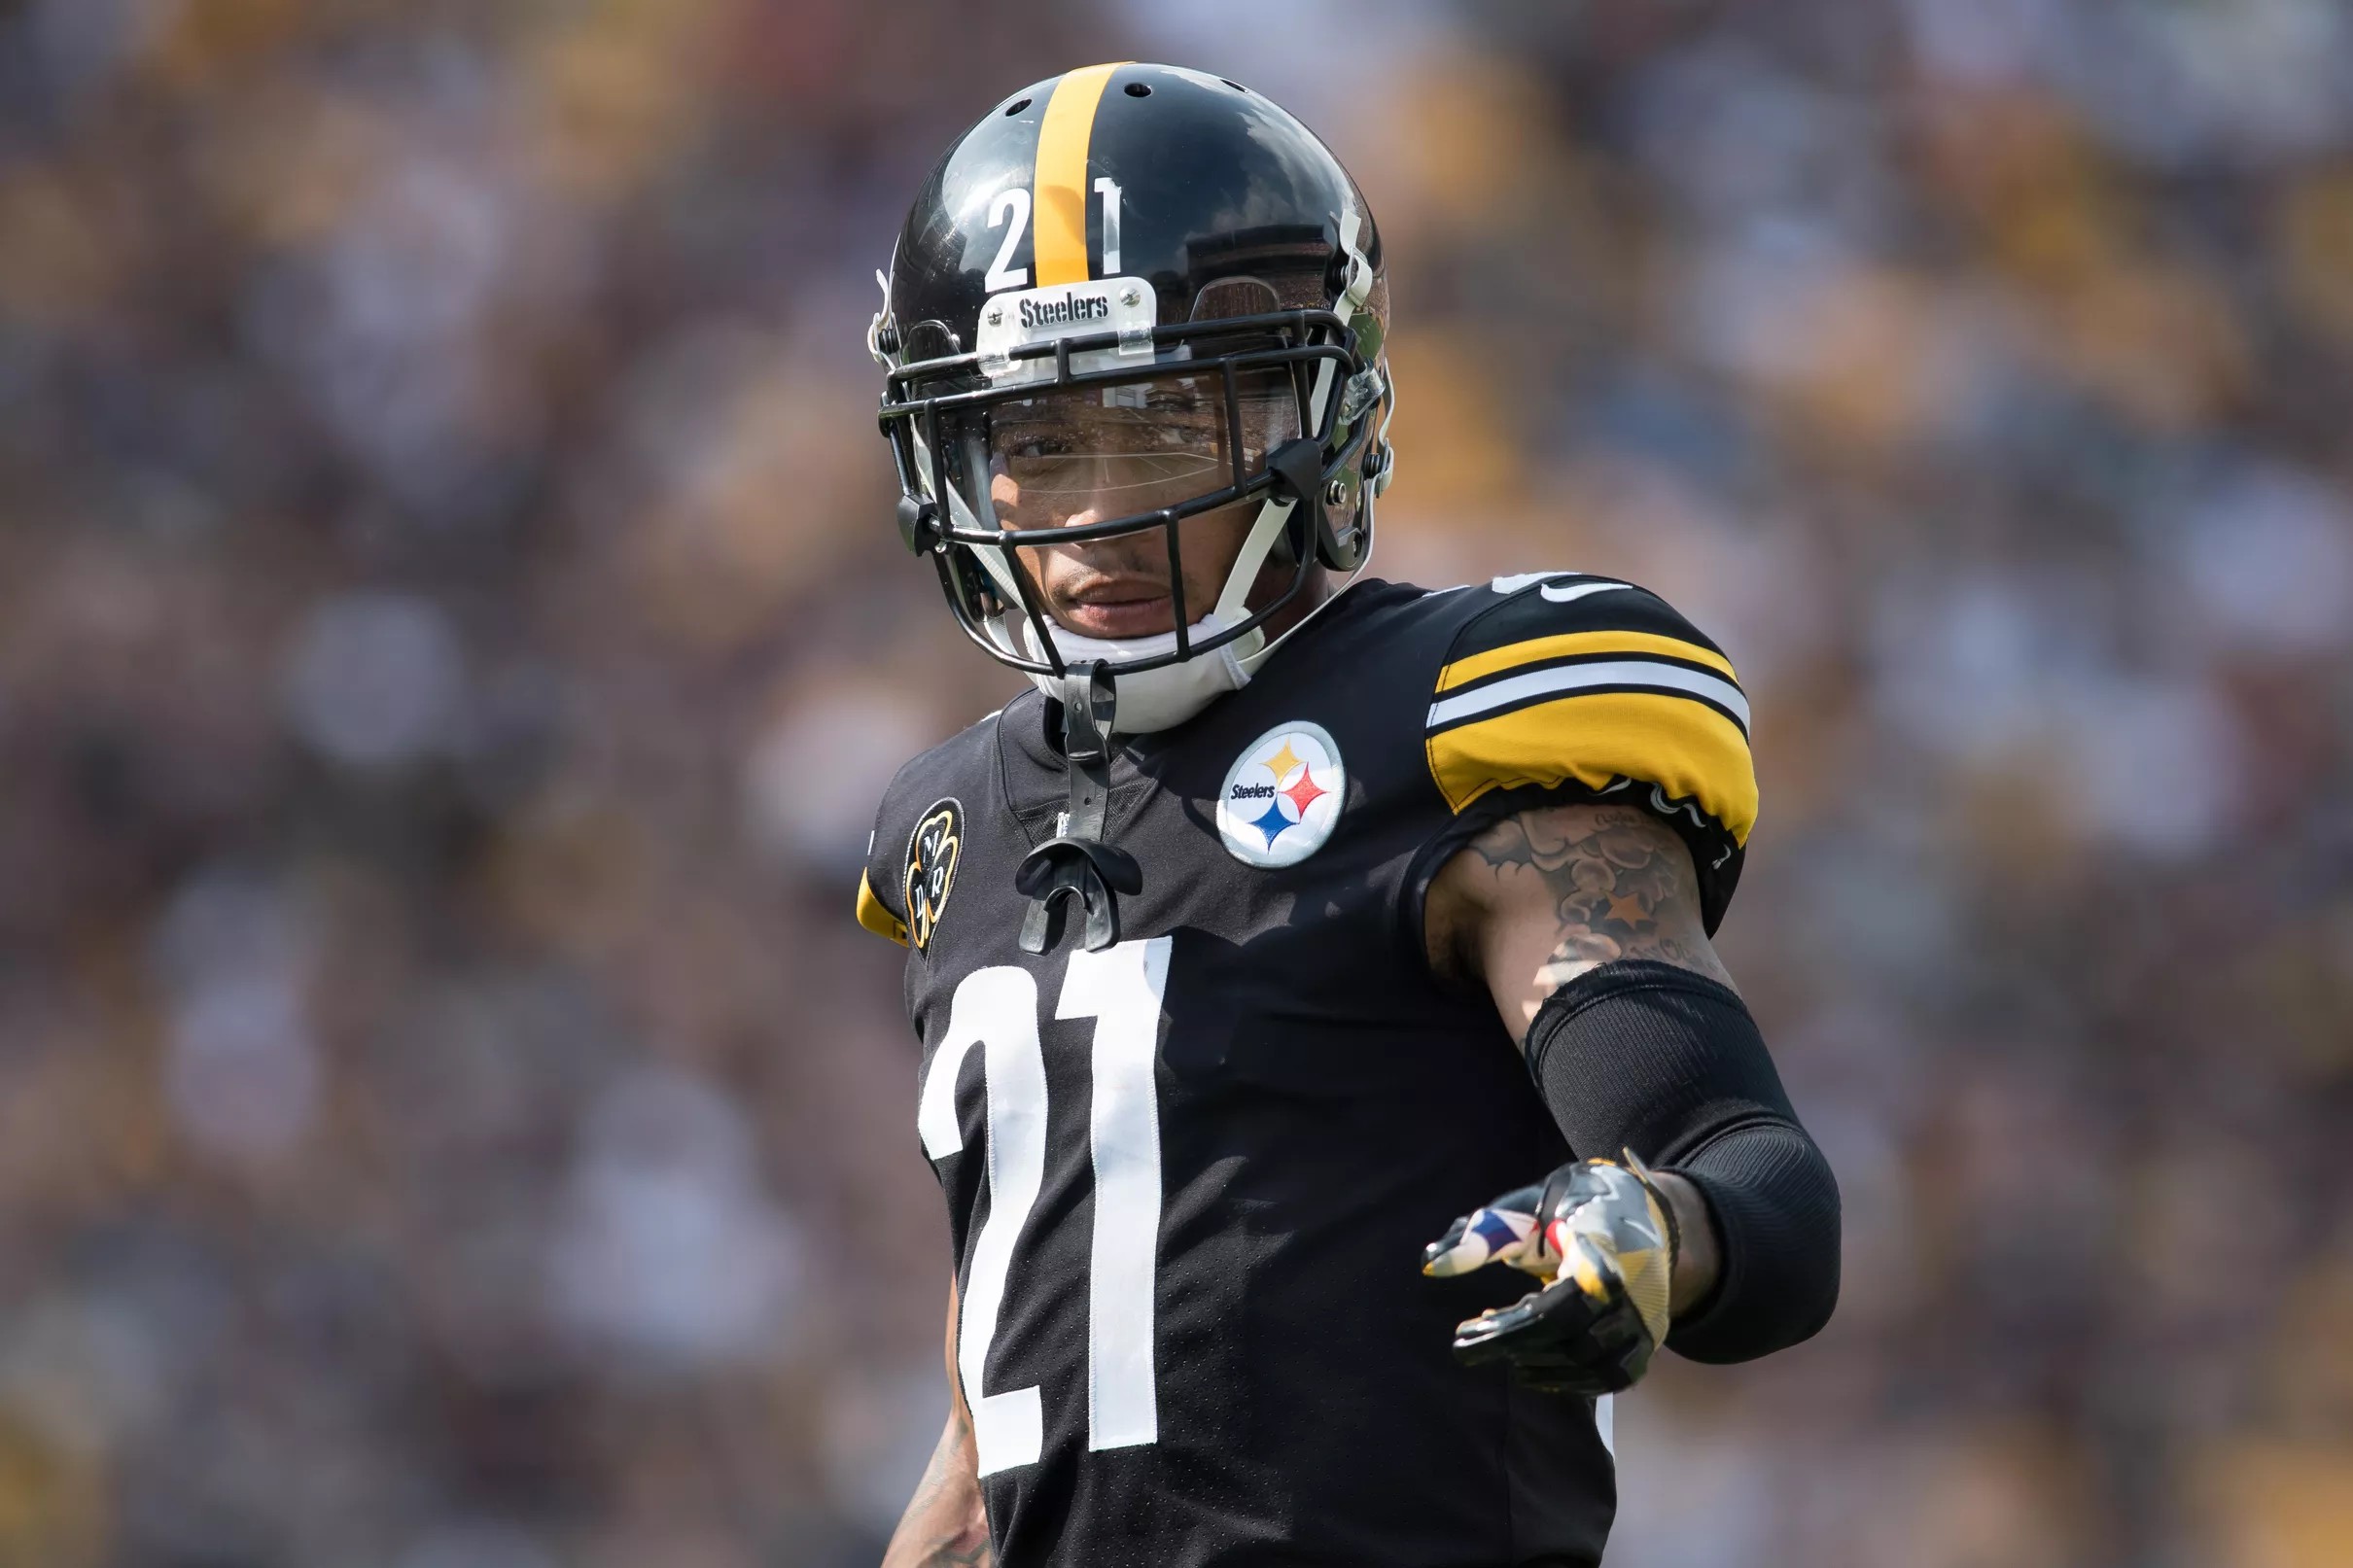 Recent history suggests Steelers will be open to adding players